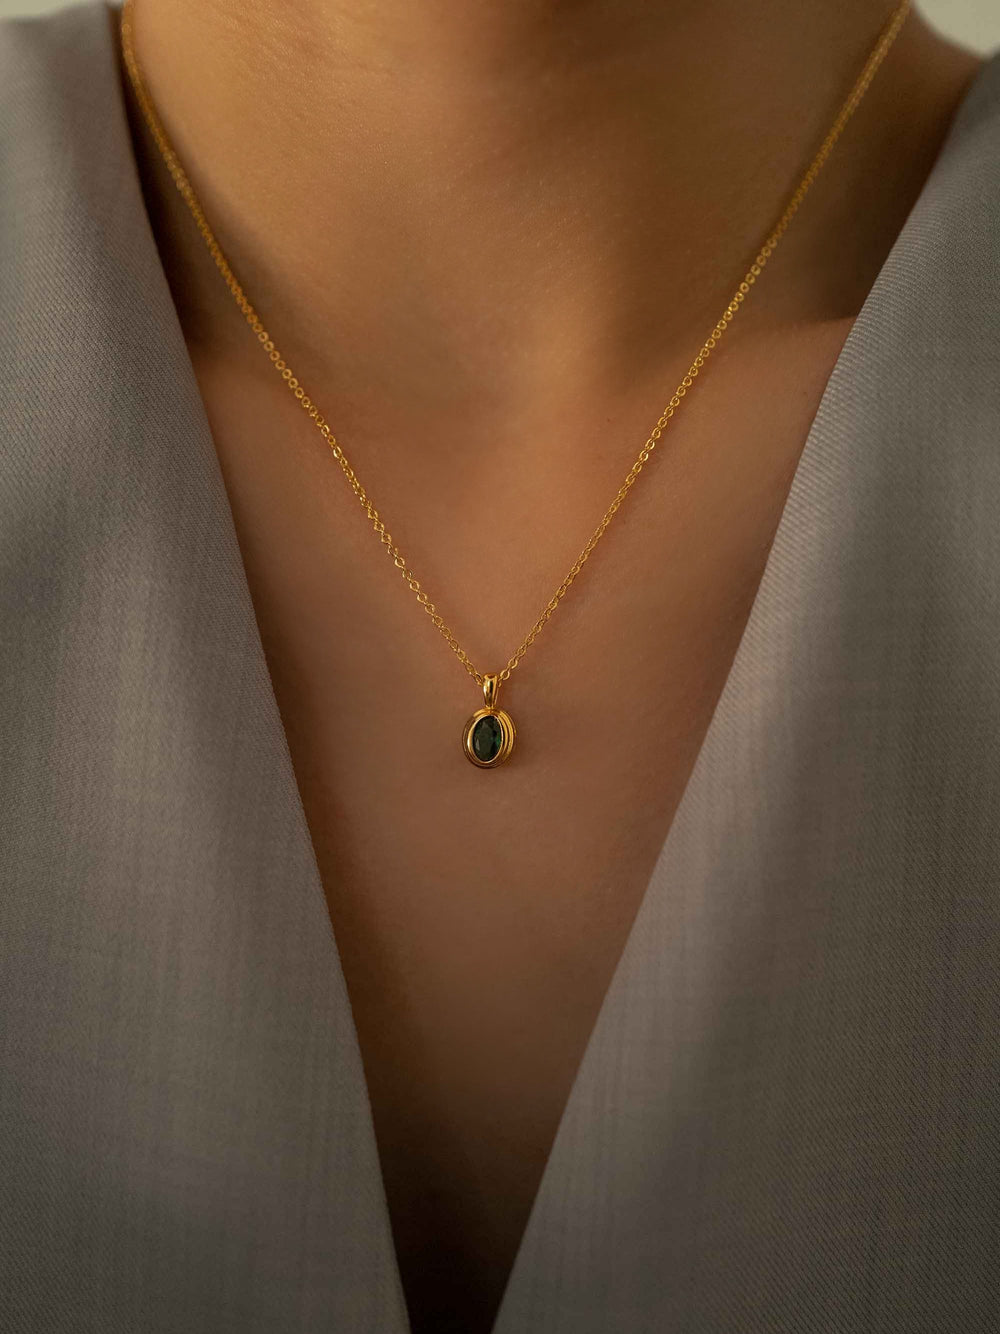 a model wear A mini green crystal oval pendant gold necklace